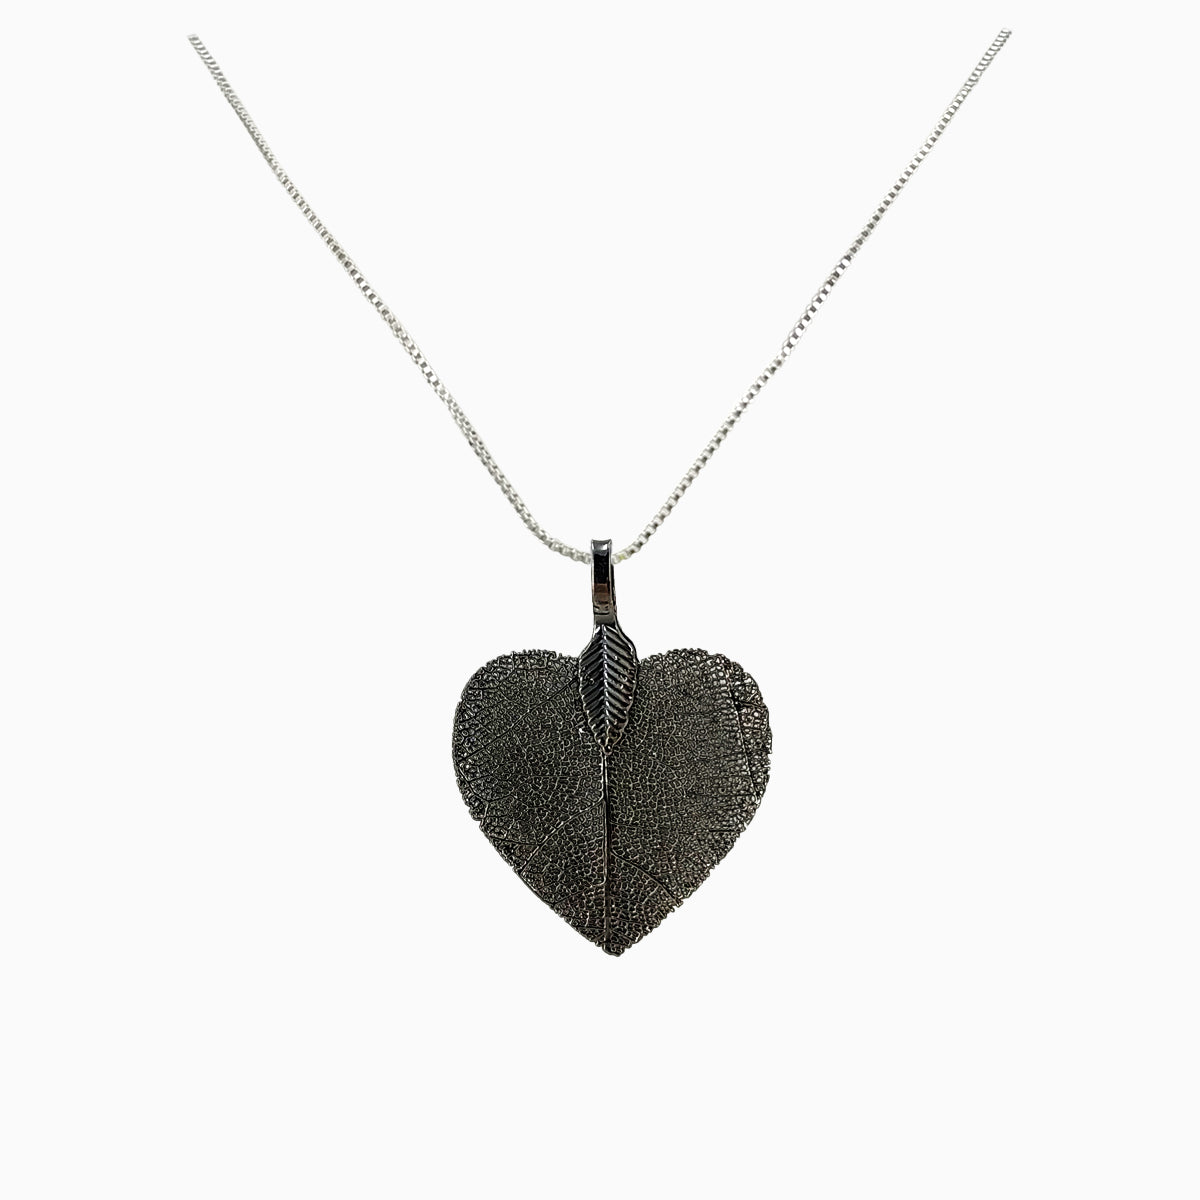 Heart - Real Leaf Pendant Necklace